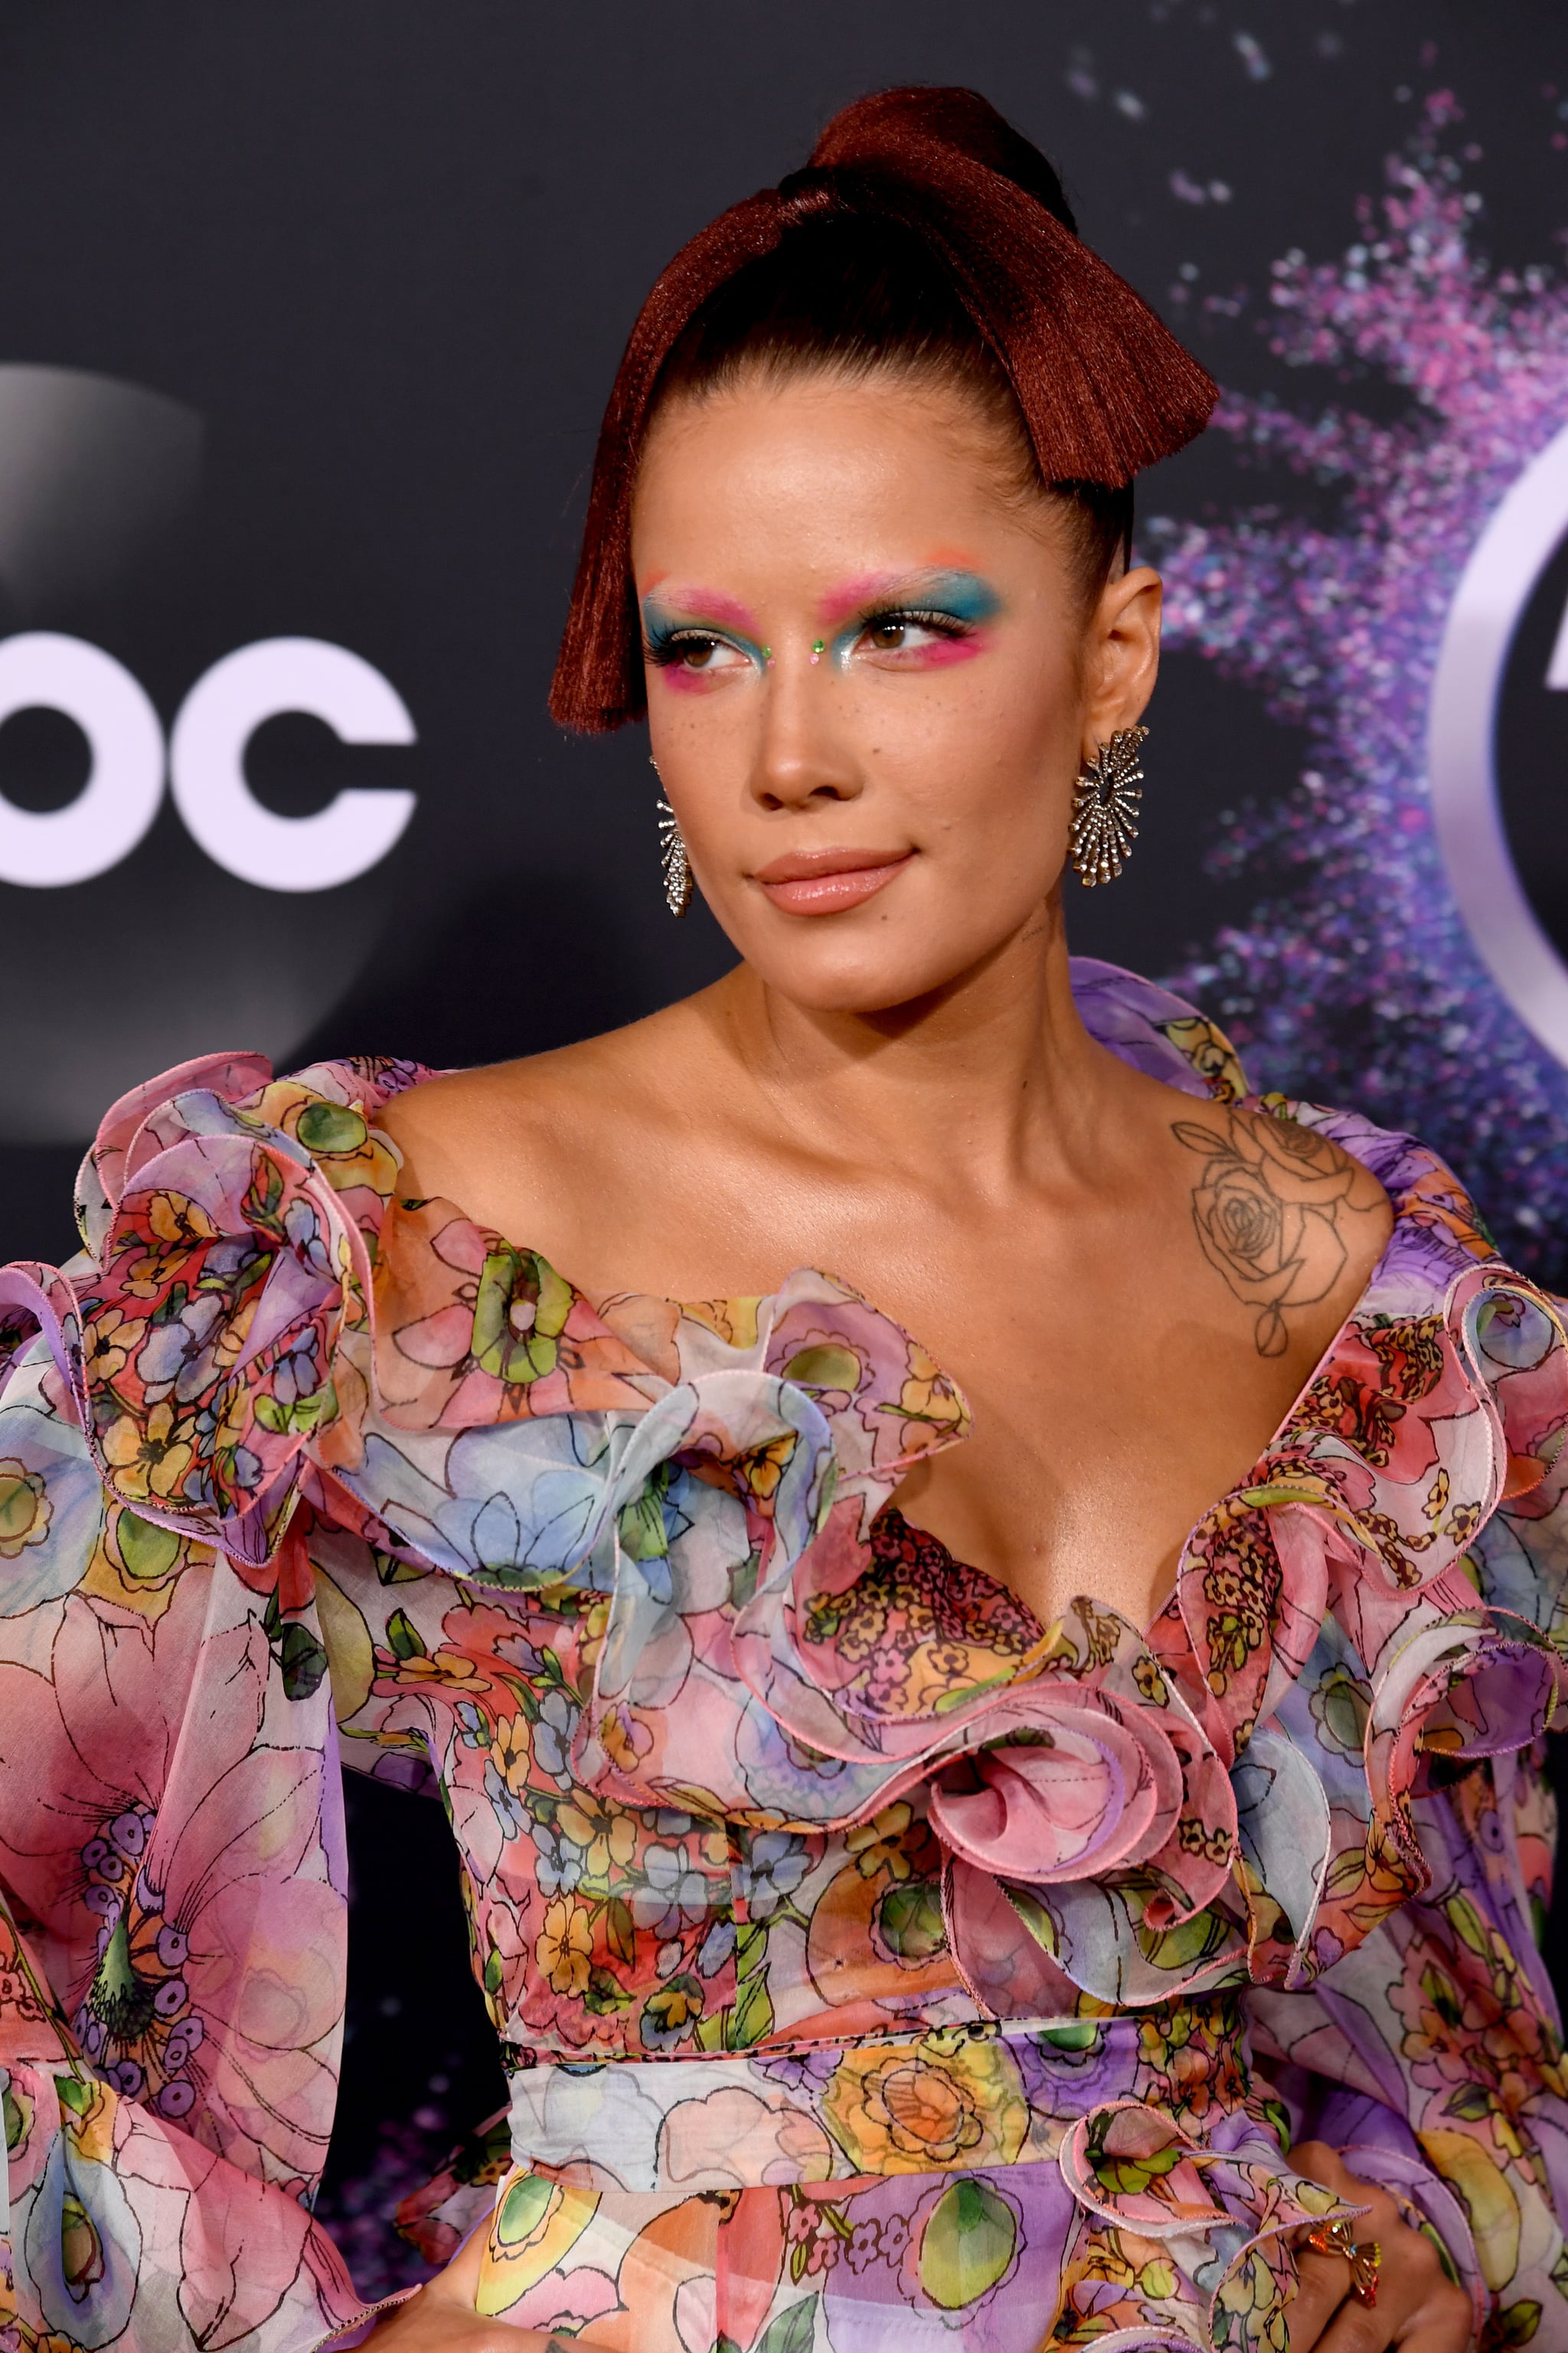 LOS ANGELES, CALIFORNIA - NOVEMBER 24: Halsey attends the 2019 American Music Awards at Microsoft Theatre on November 24, 2019 in Los Angeles, California. (Photo by Jeff Kravitz/FilmMagic for dcp)